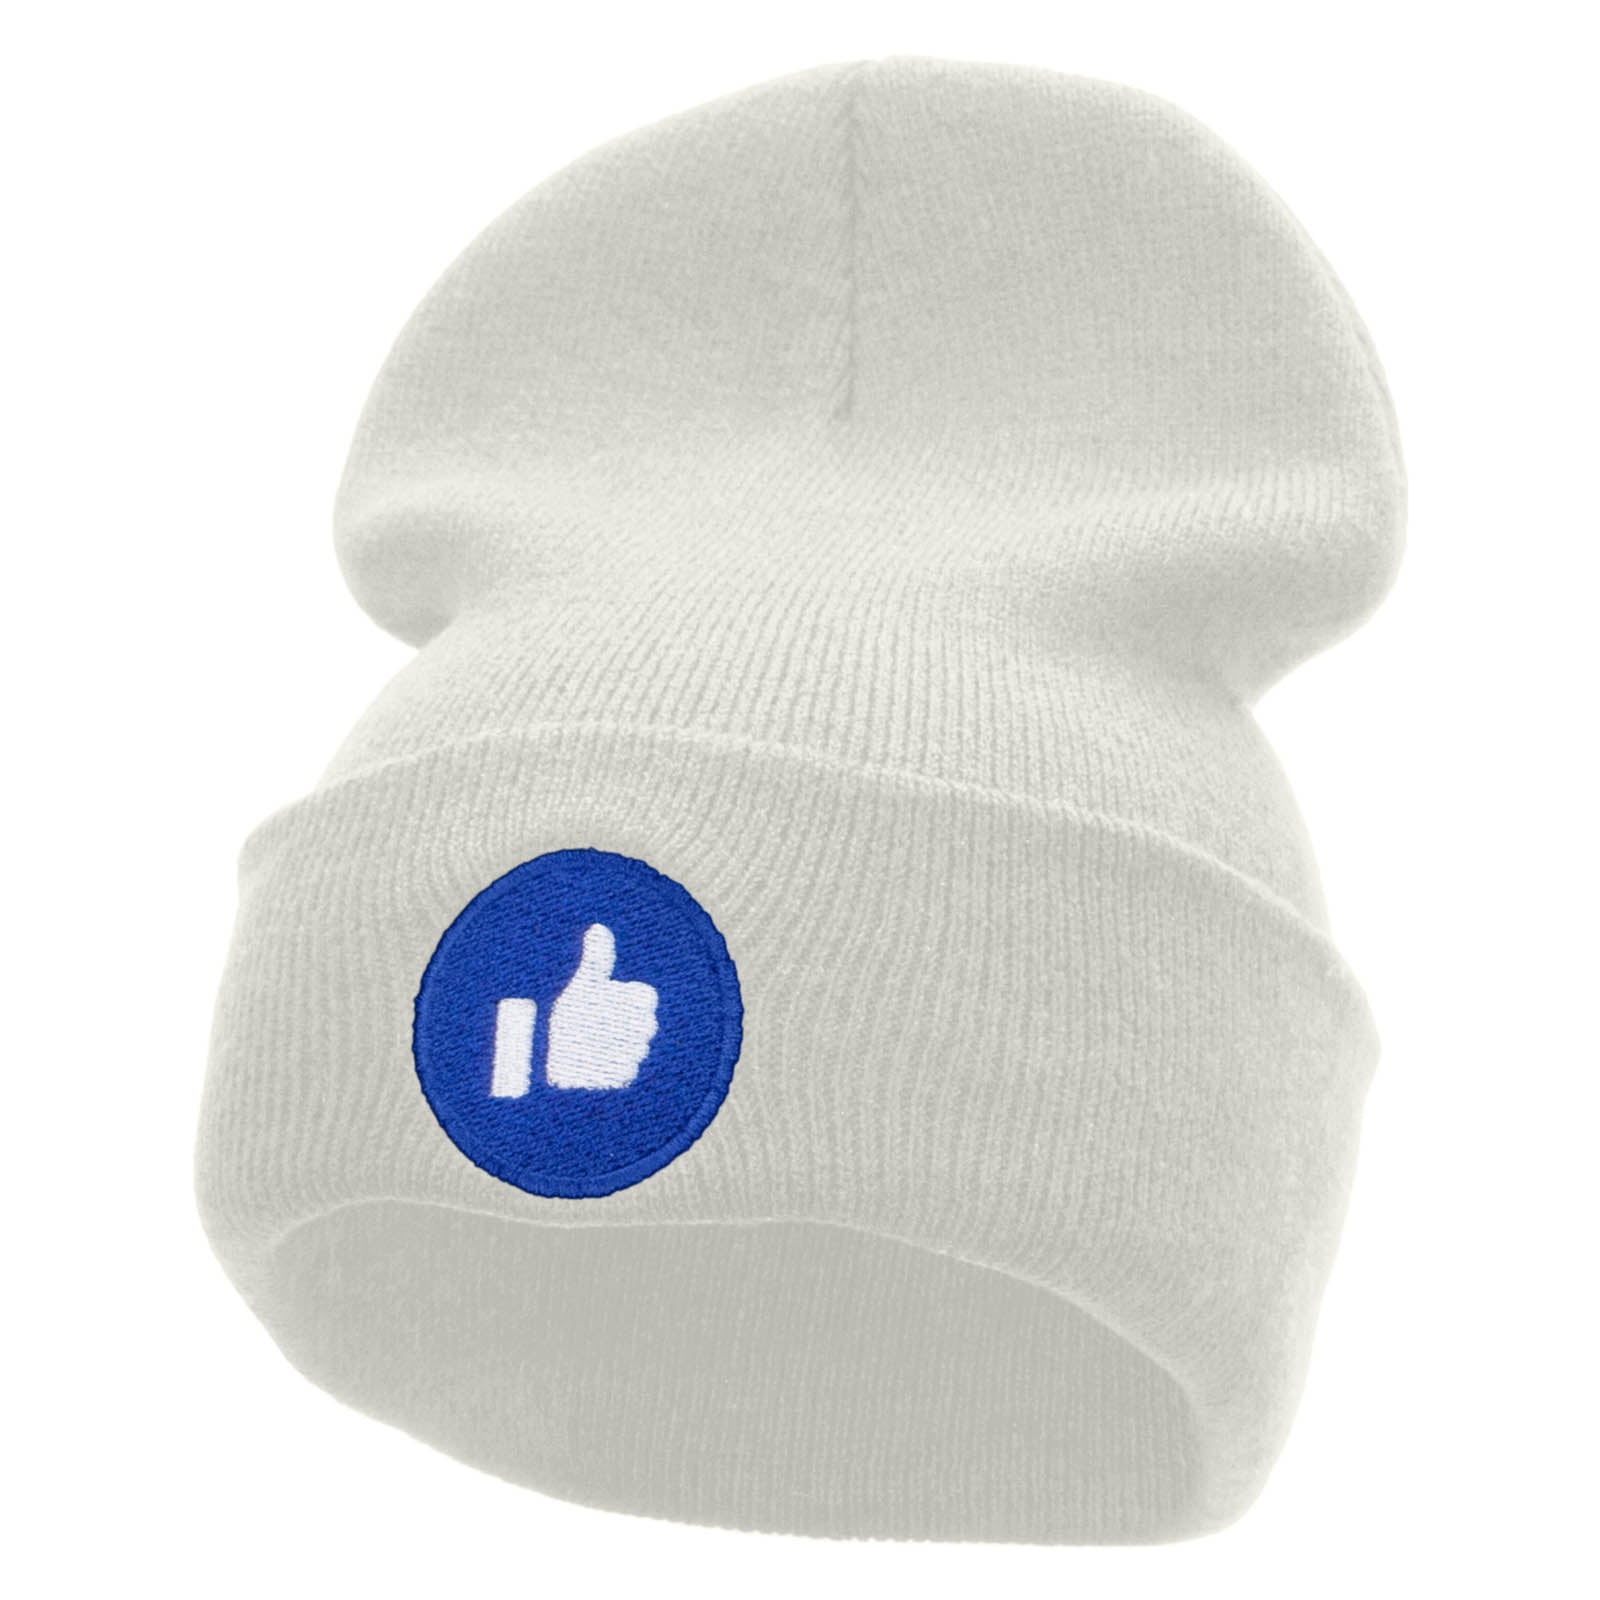 Give Thumbs Up Embroidered 12 Inch Long Knitted Beanie - White OSFM